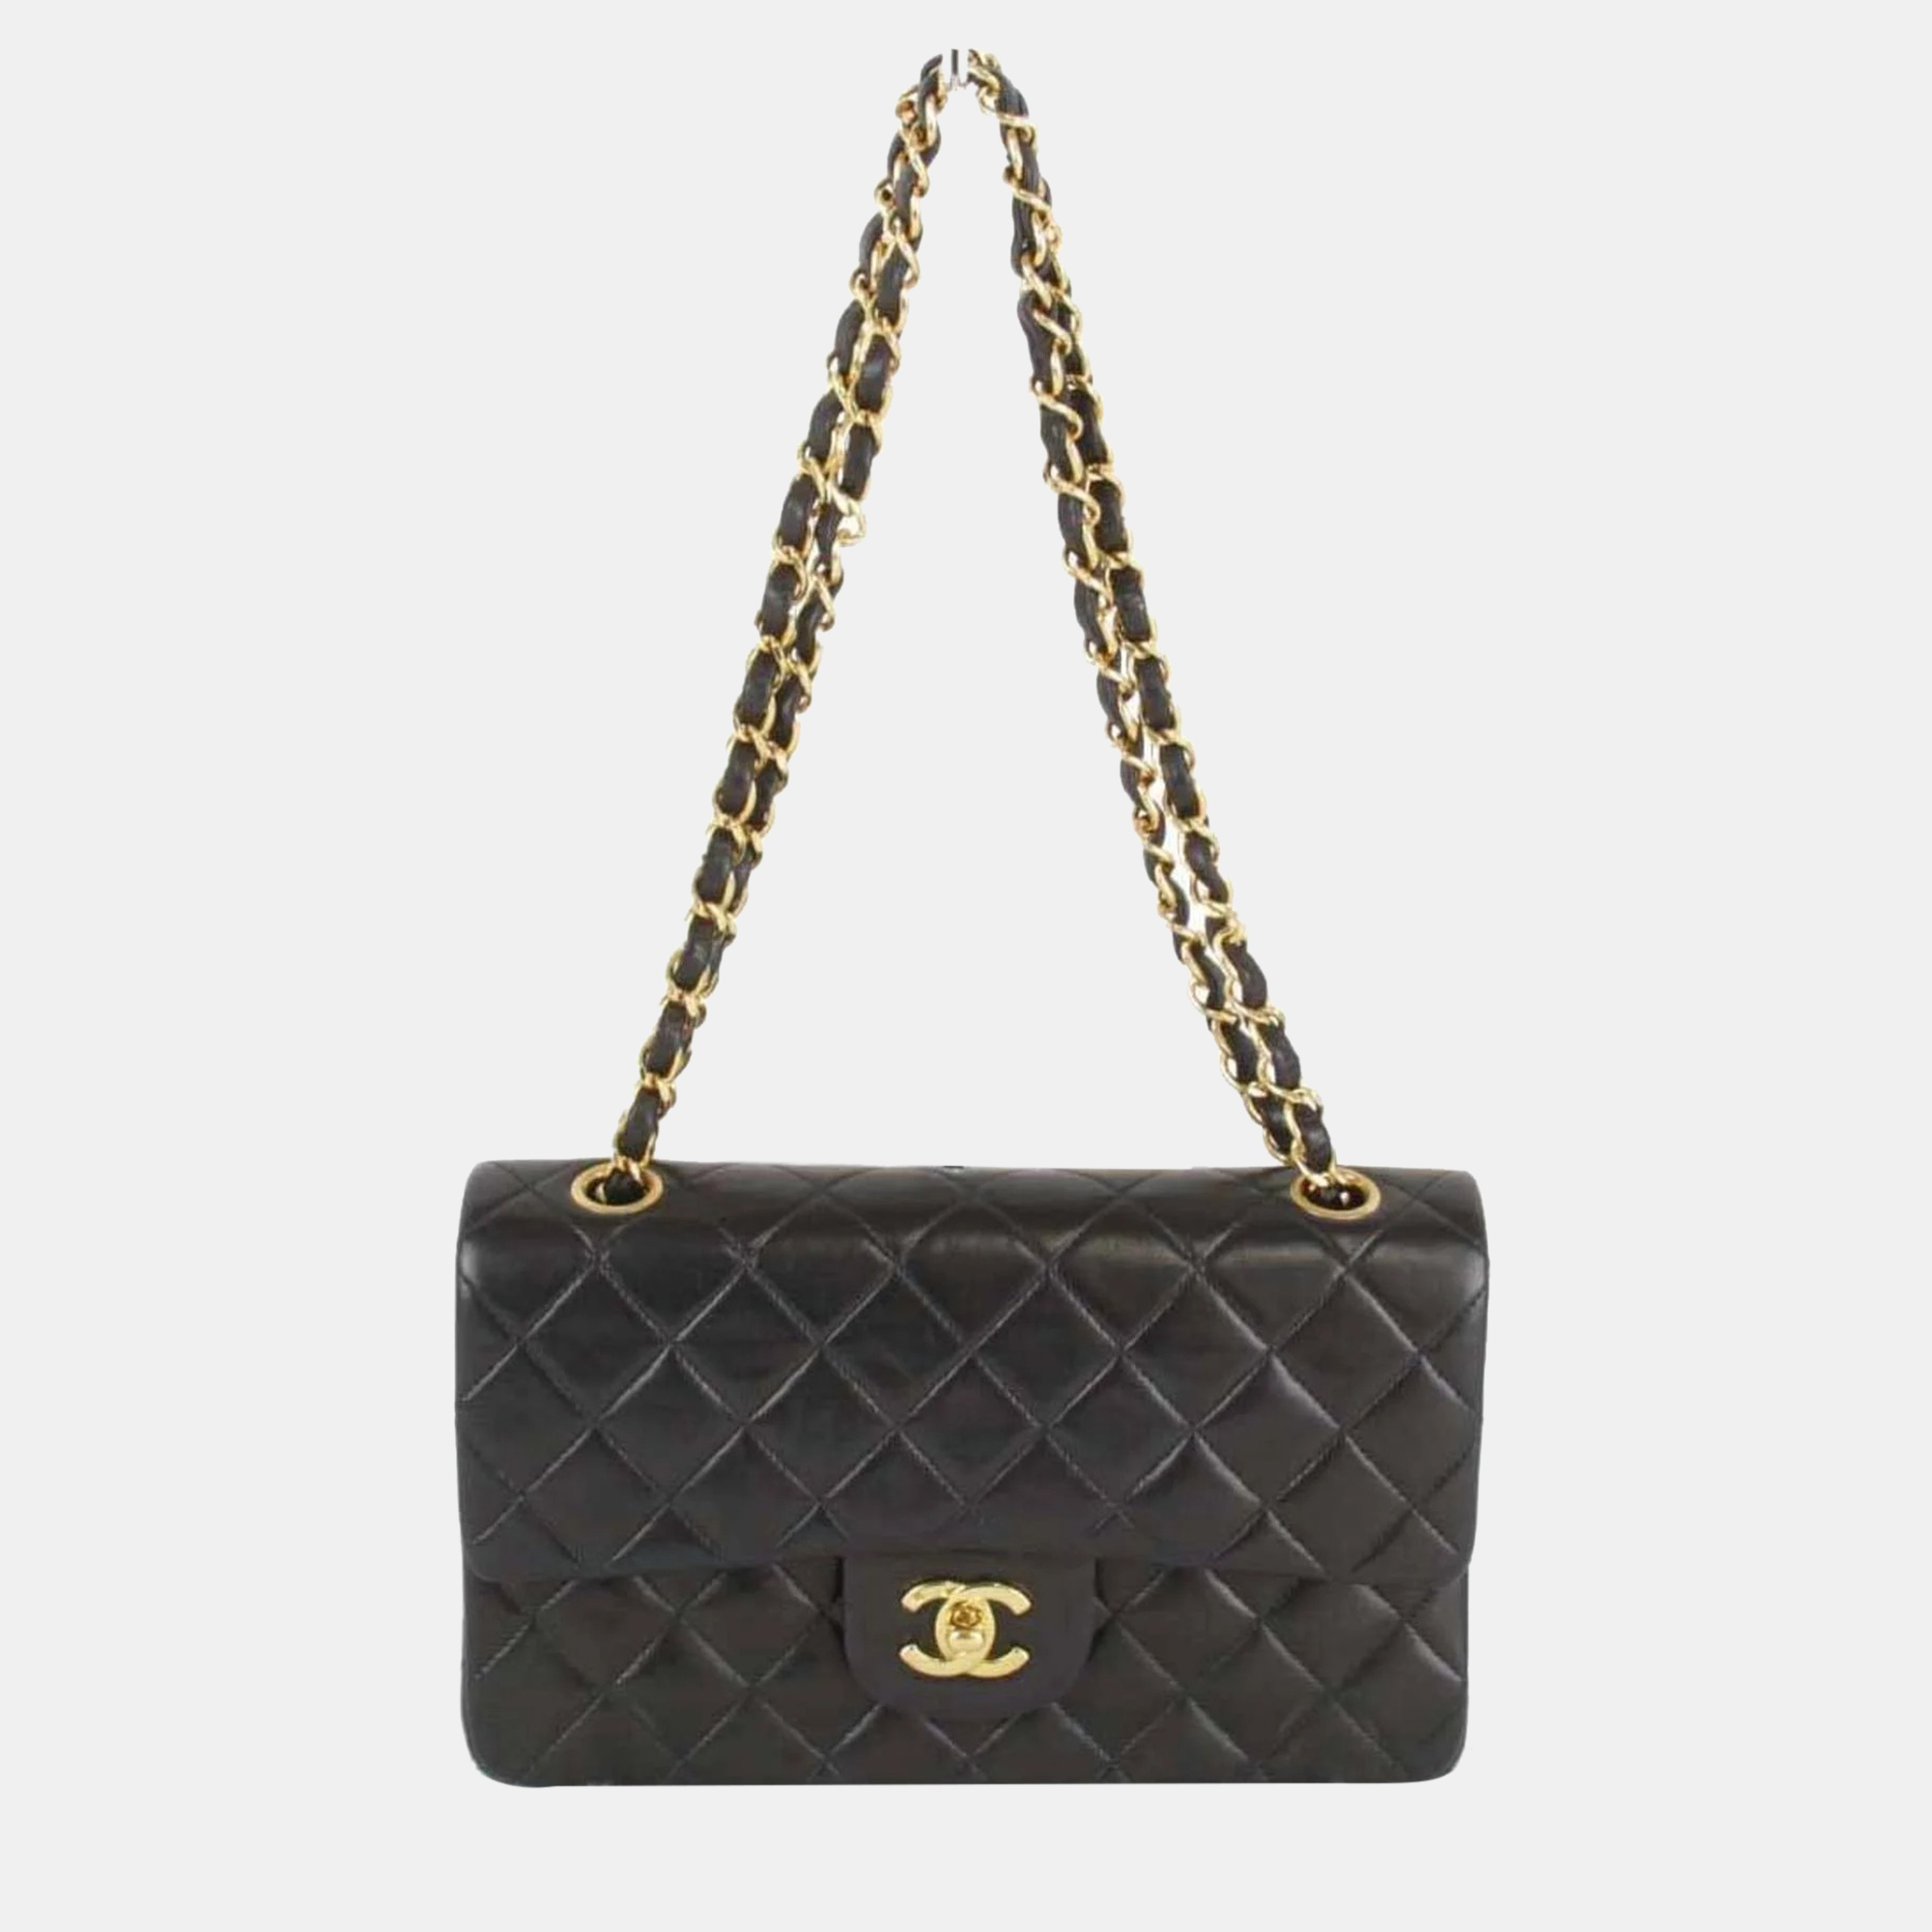 Chanel  lambskin leather small classic double flap shoulder bags